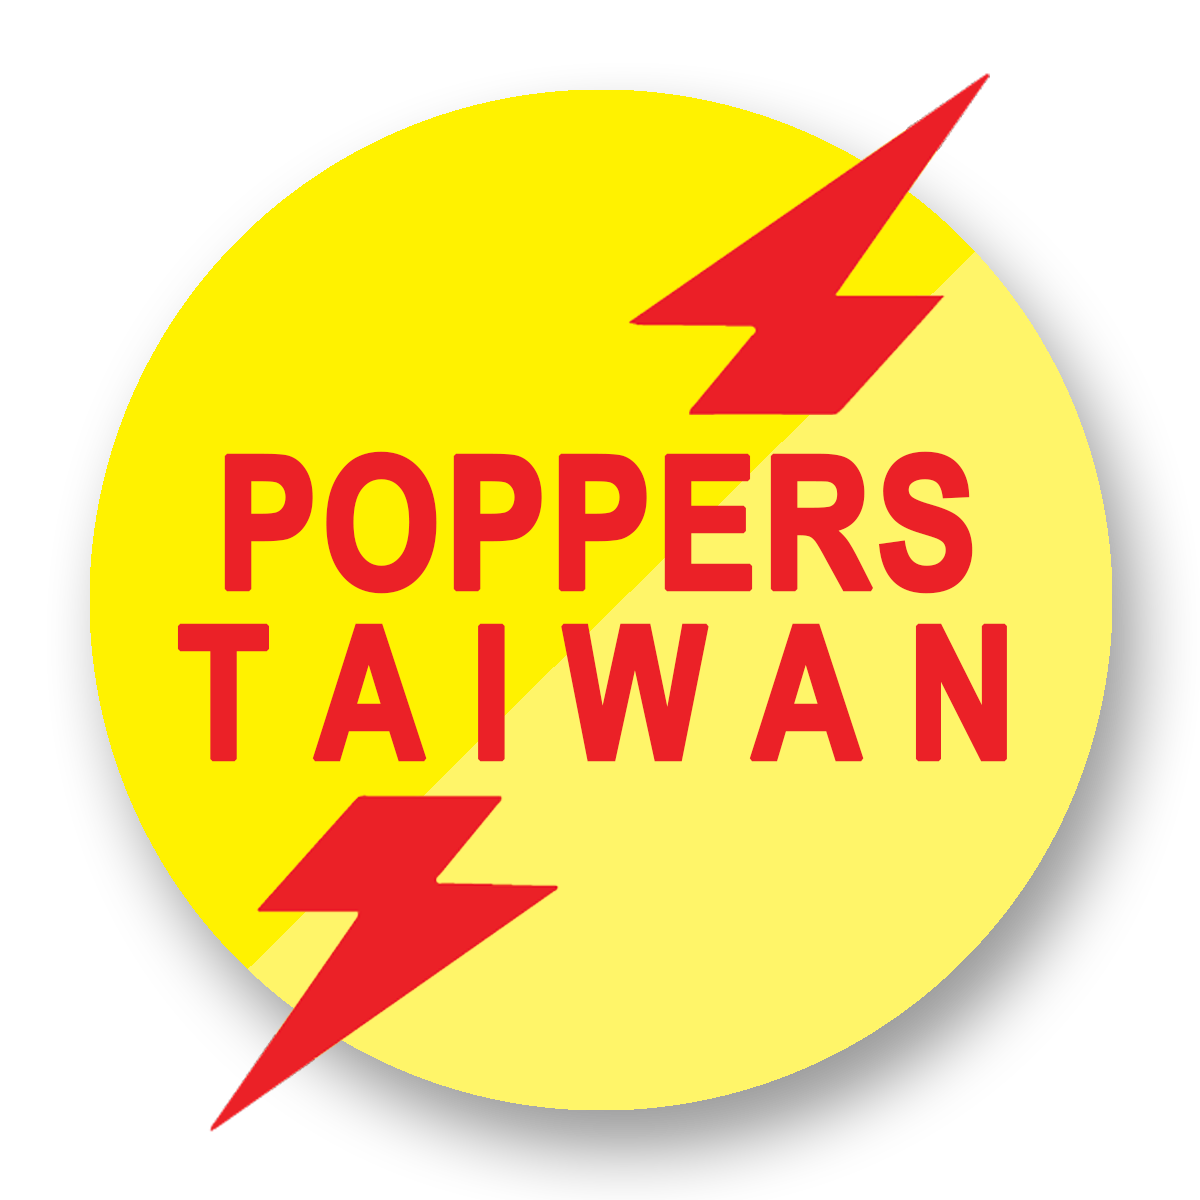 POPPERS TAIWAN